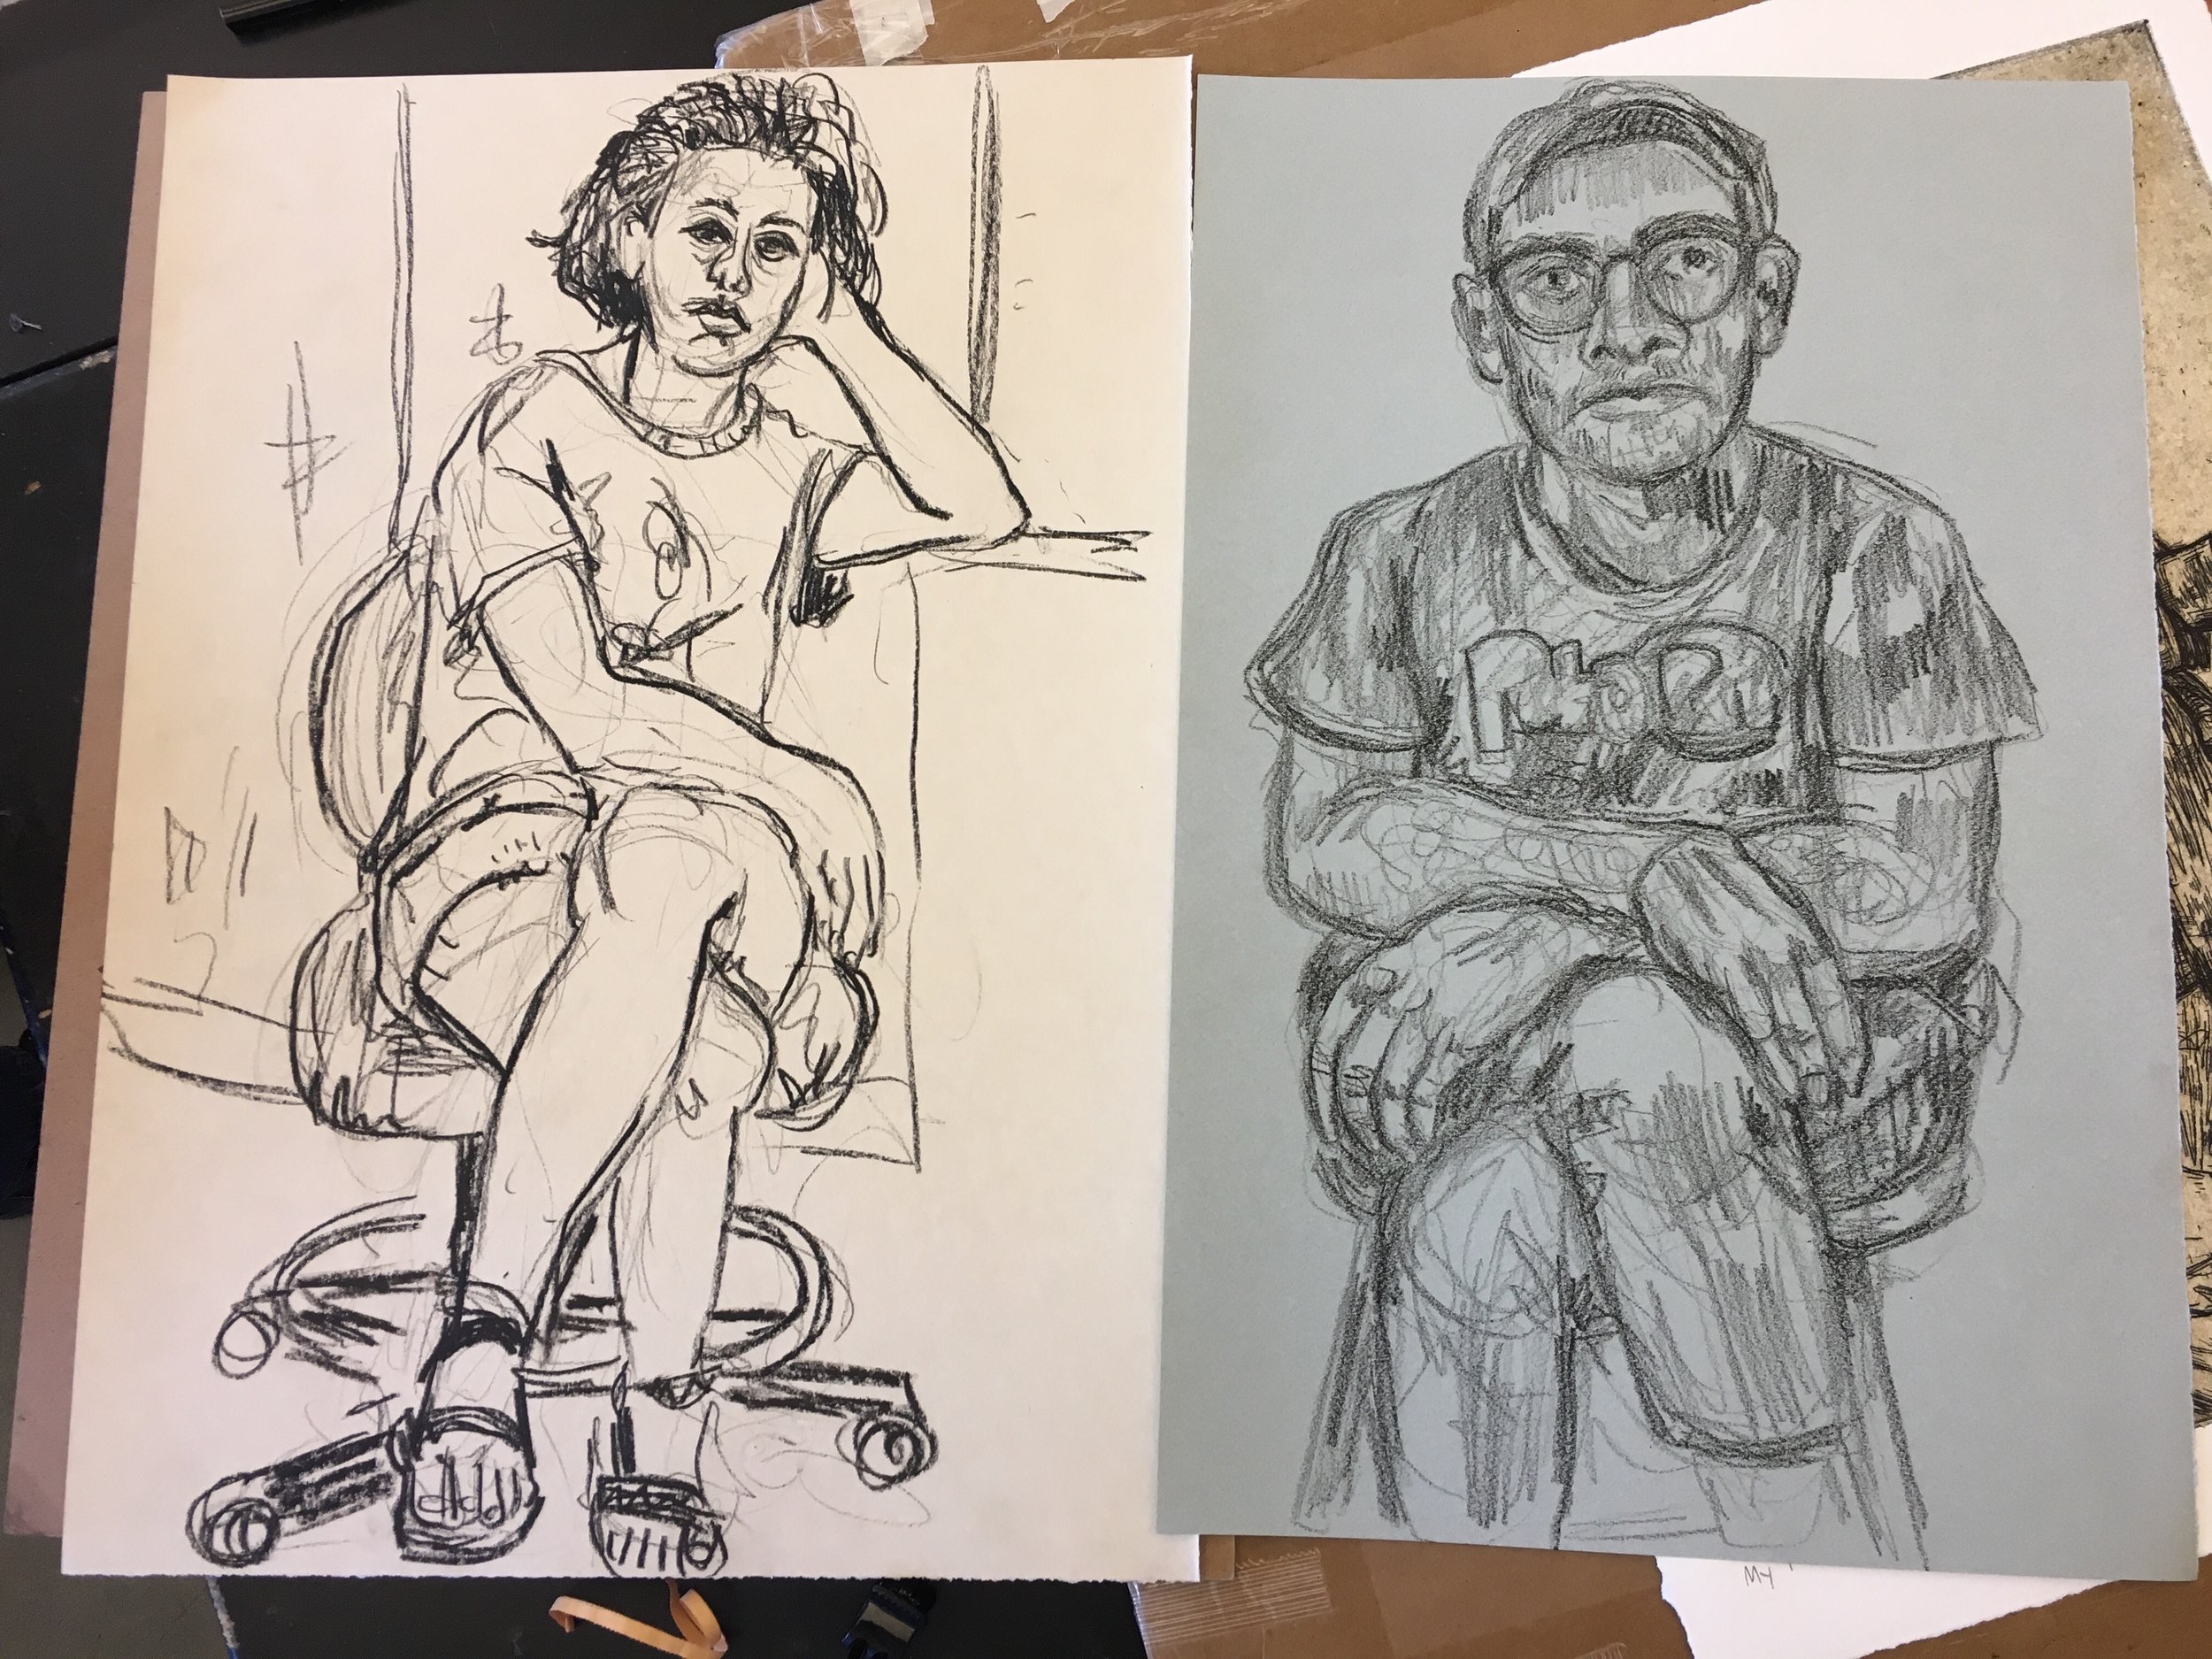 Trading portraits before leaving (drawing on left by Teddy Lepley) / Muncie IN